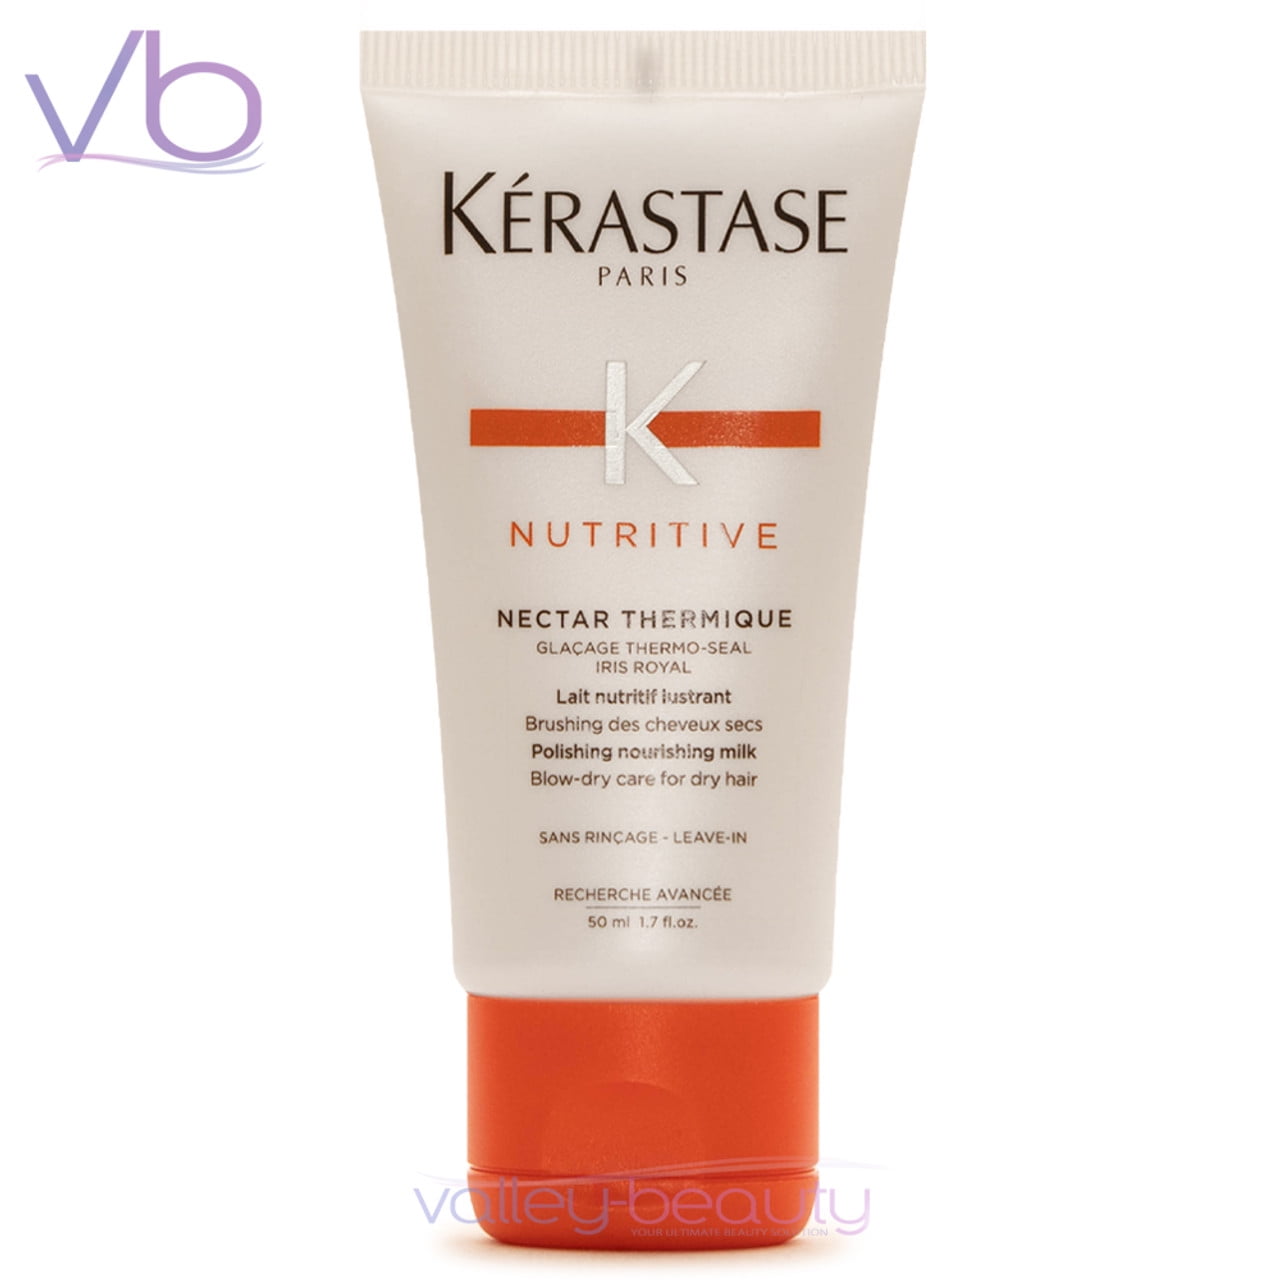 Kerastase Nectar Thermique Leave-In Heat Protectant for Hair, 50ml - Walmart.com